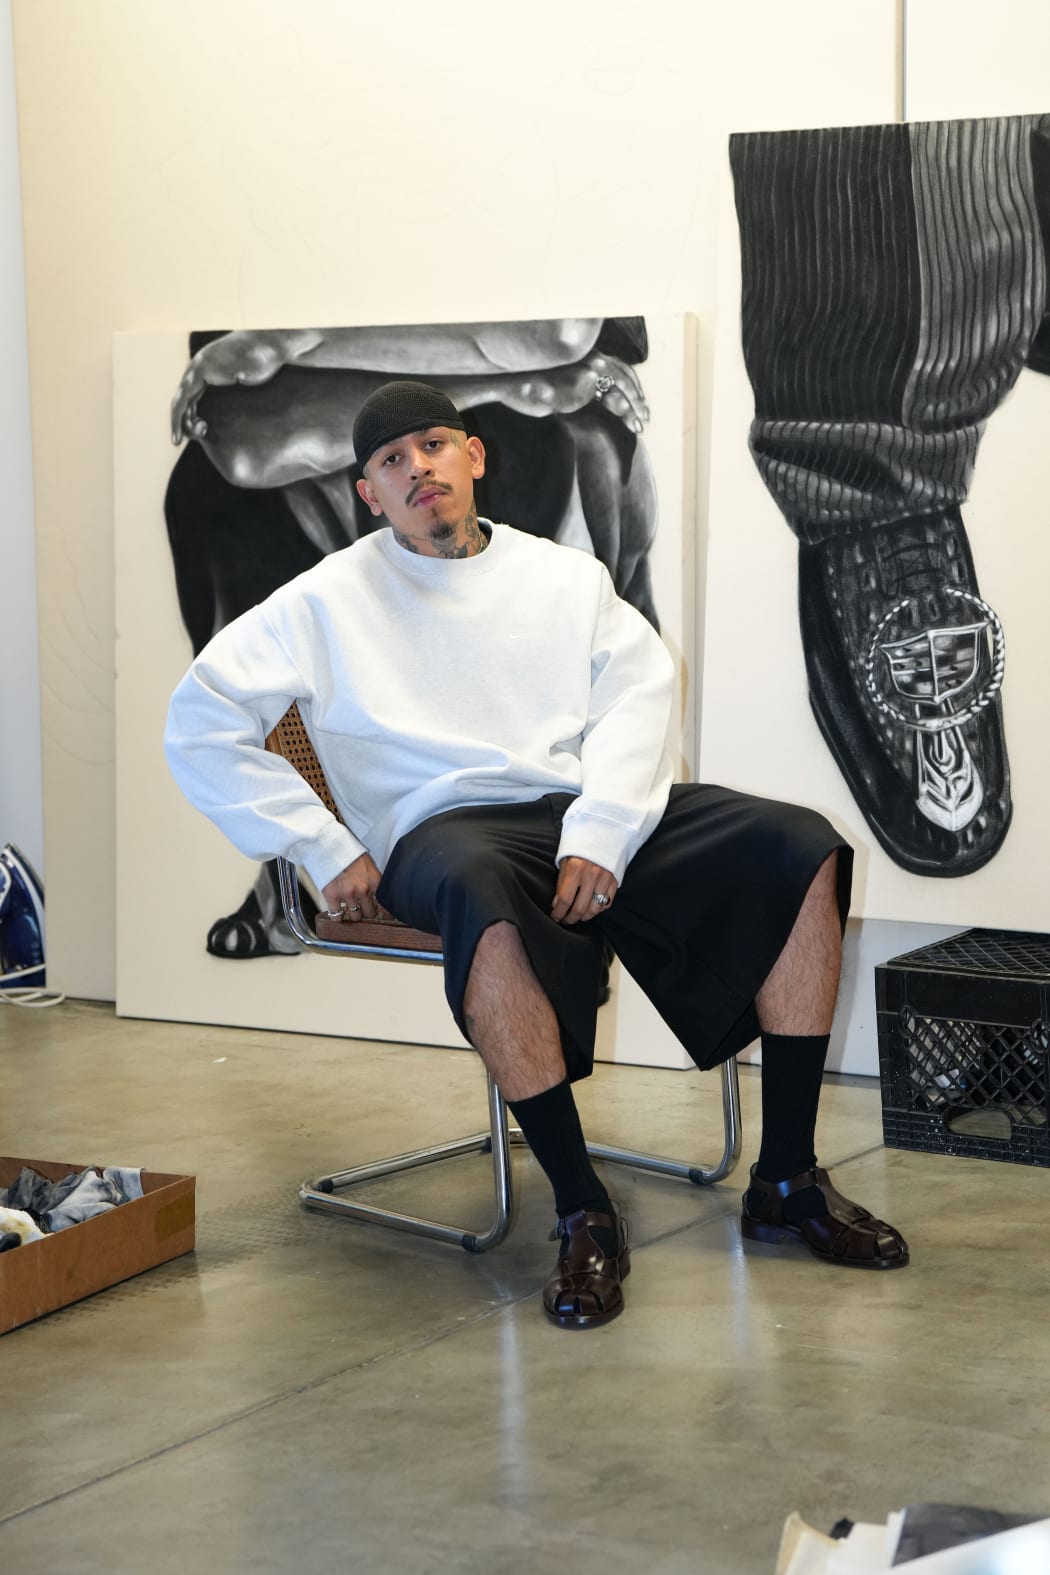 photo of the artist Esteban Samyoa sitting in a chair in his studio with paintings behind him